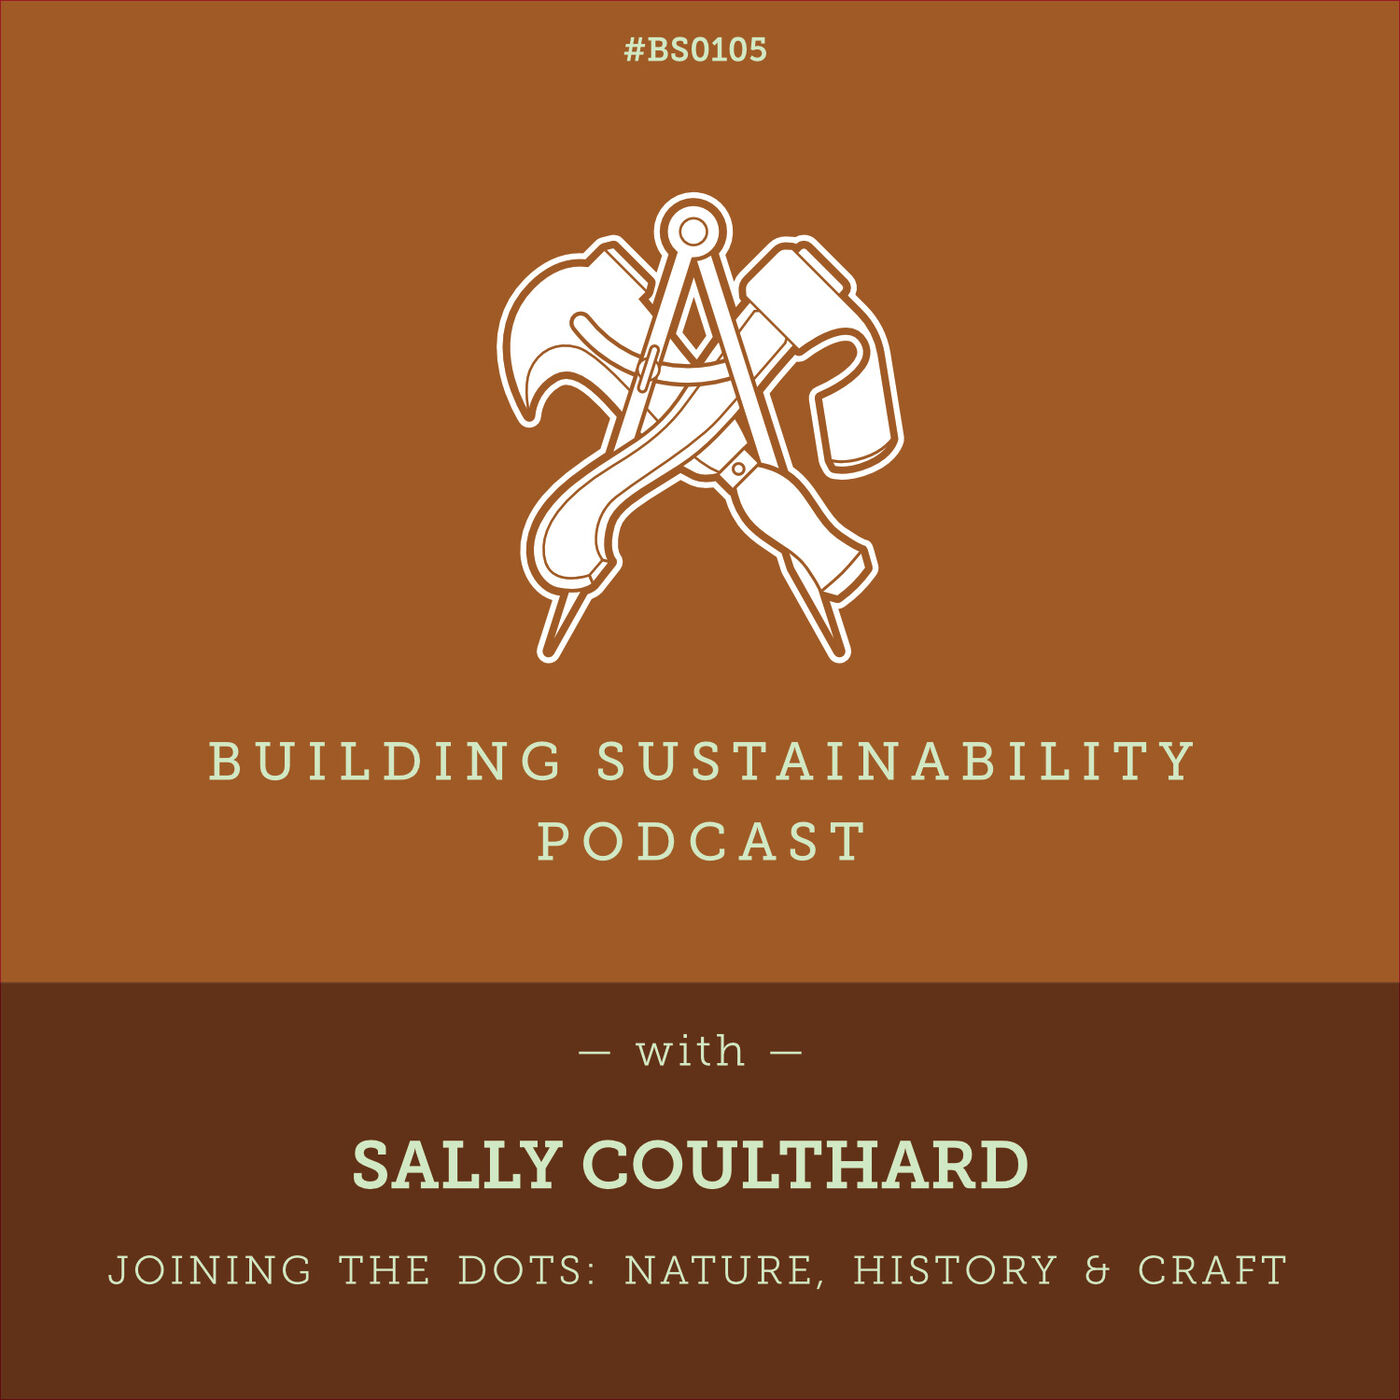 Joining the Dots: Nature, History & Craft [Pt1] - Sally Coulthard - BS105